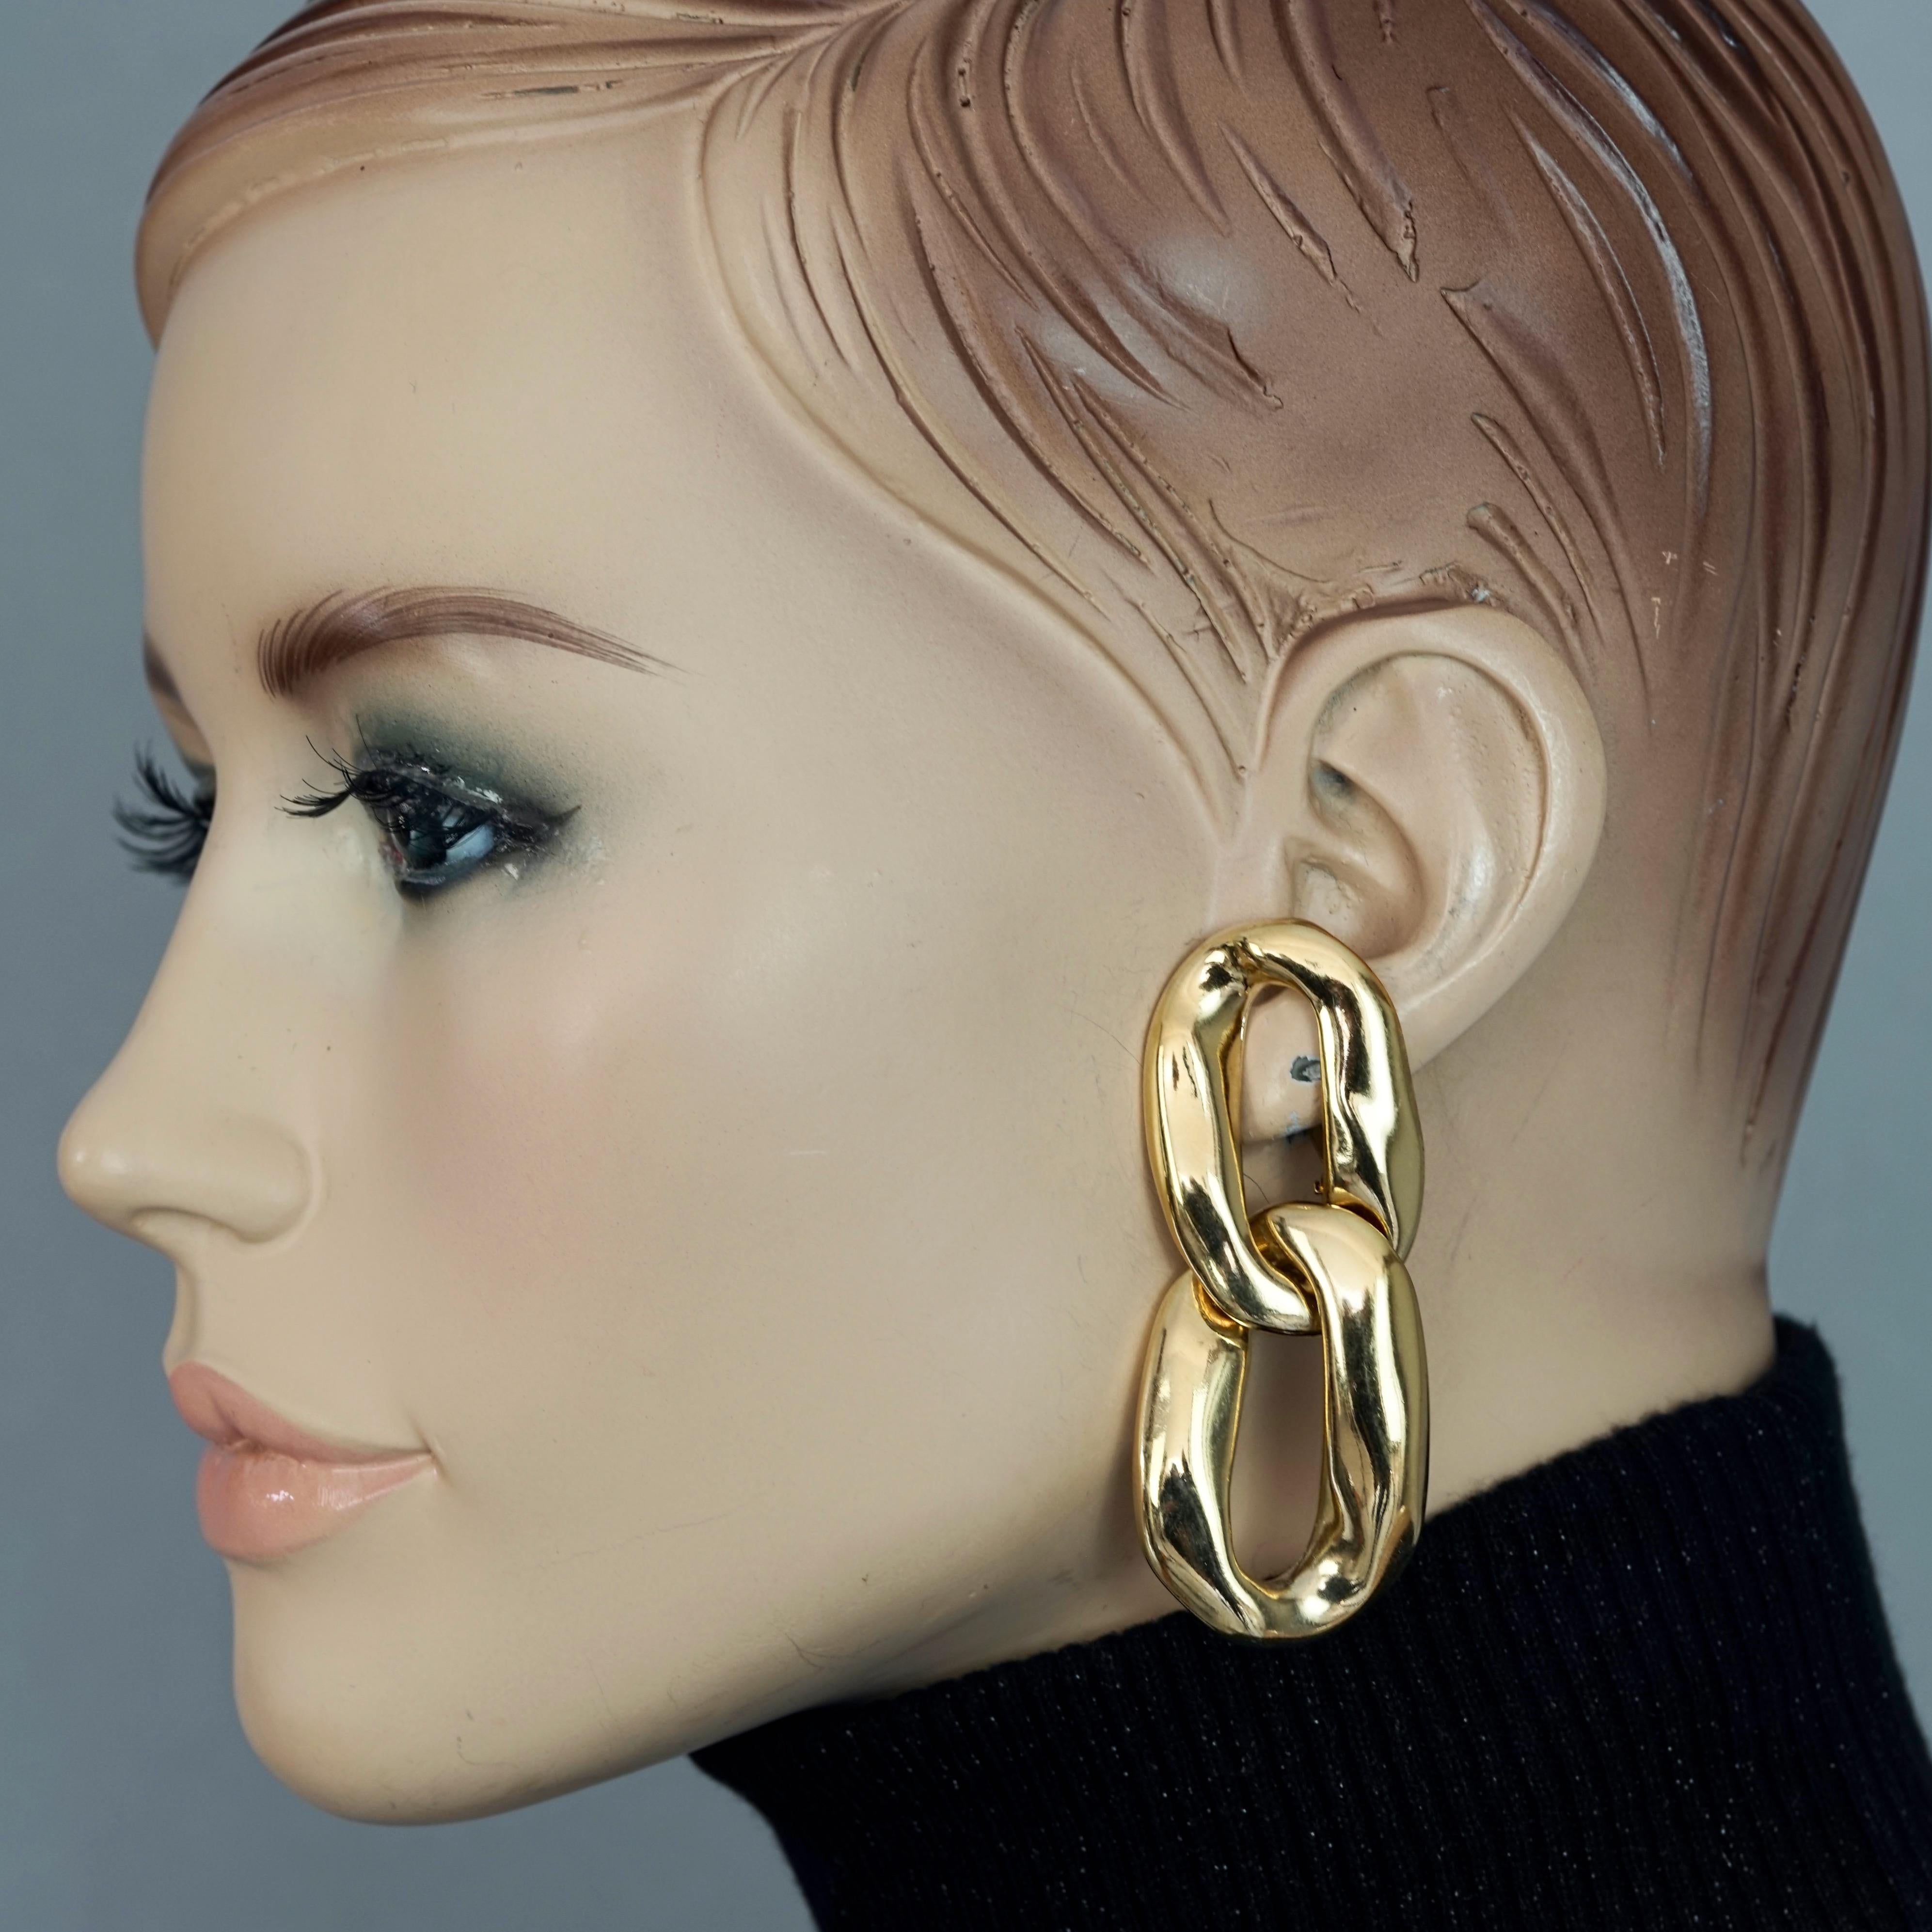 Vintage YVES SAINT LAURENT Ysl by Robert Goossens Chunky Chain Earrings

Measurements:
Height: 2.67 inches (6.8 cm)
Width: 1.10 inches (2.8 cm)
Weight per Earring: 24 grams

Features:
- 100% Authentic YVES SAINT LAURENT.
- Chunky chain links.
- Clip